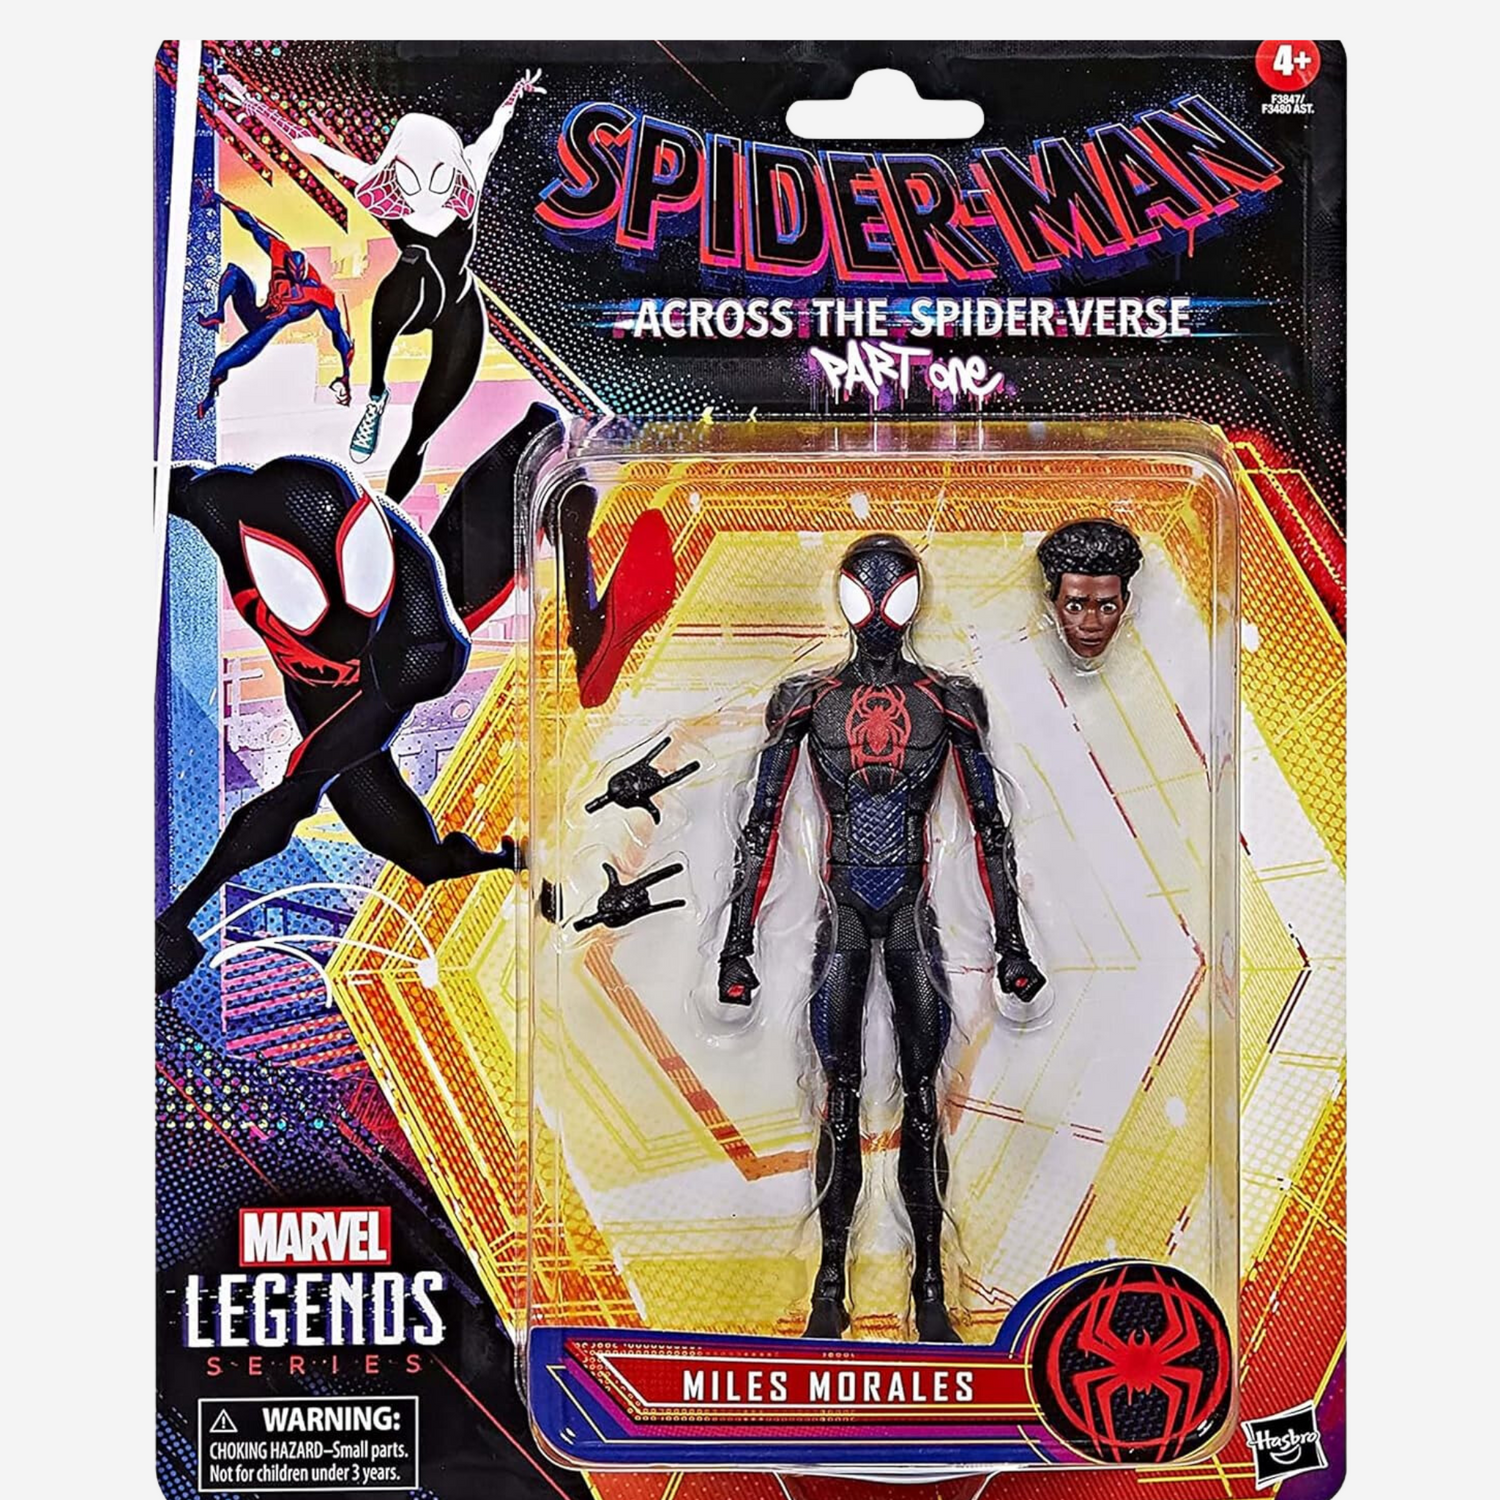 Marvel Legends Series Spider-Man: Across The Spider 6-inch Action Figure Toy, 3 Accessories